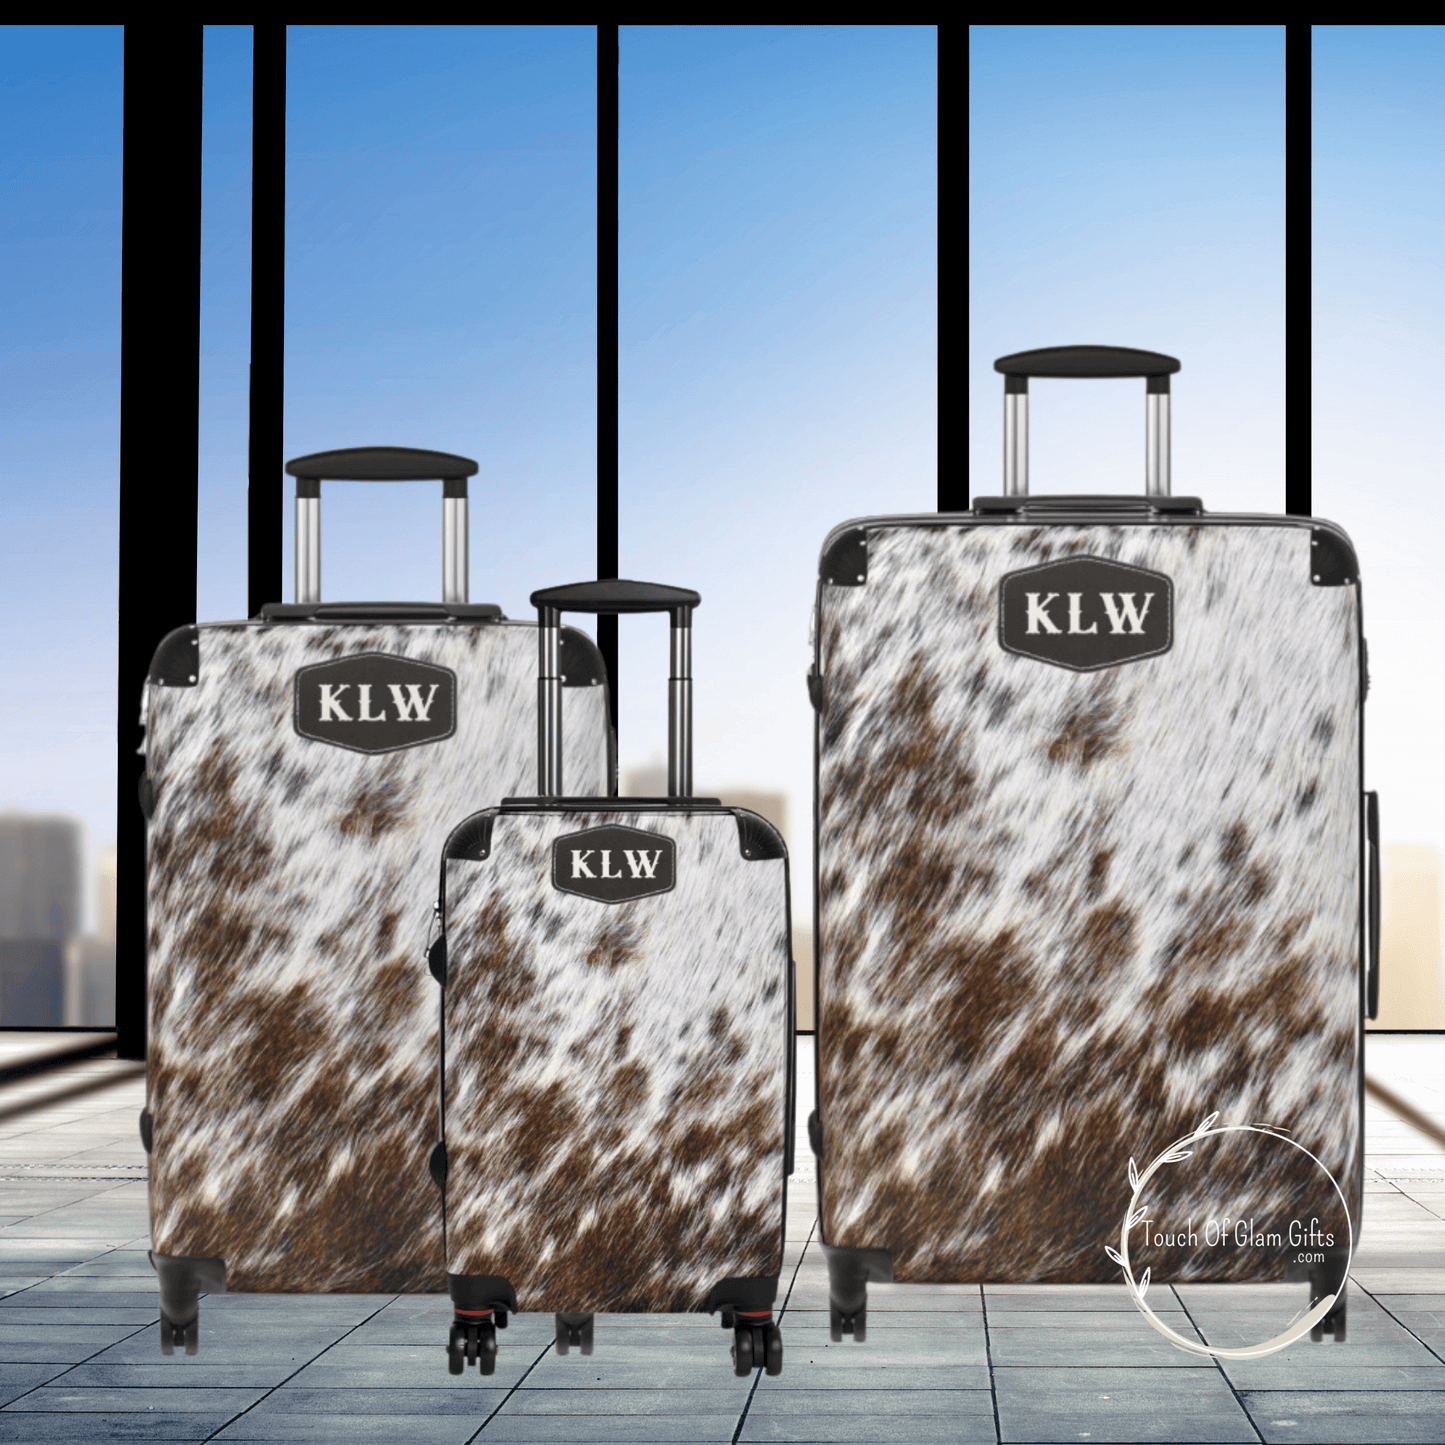 A set of 3 piece luggage set. The perfect Christmas gift for the country and western lover. Indulge in a quality, customized luggage piece. These can be purchased separately or as a set.